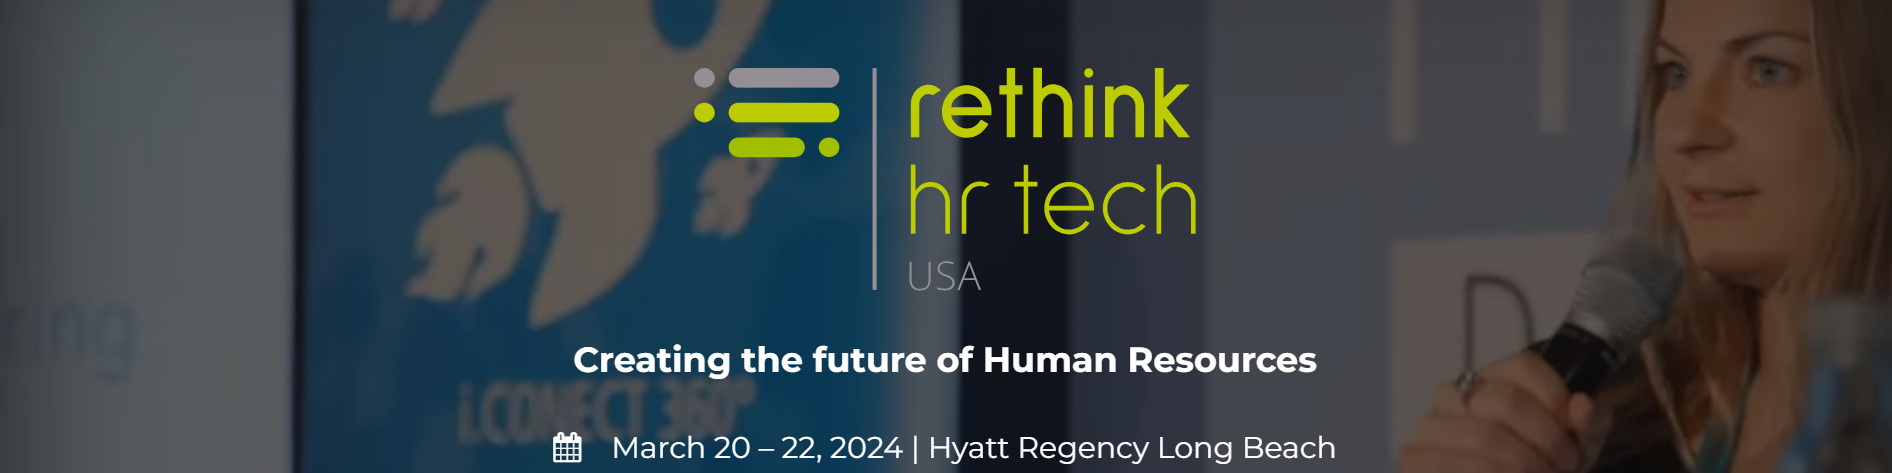 HrTech Events of the month - March 2024